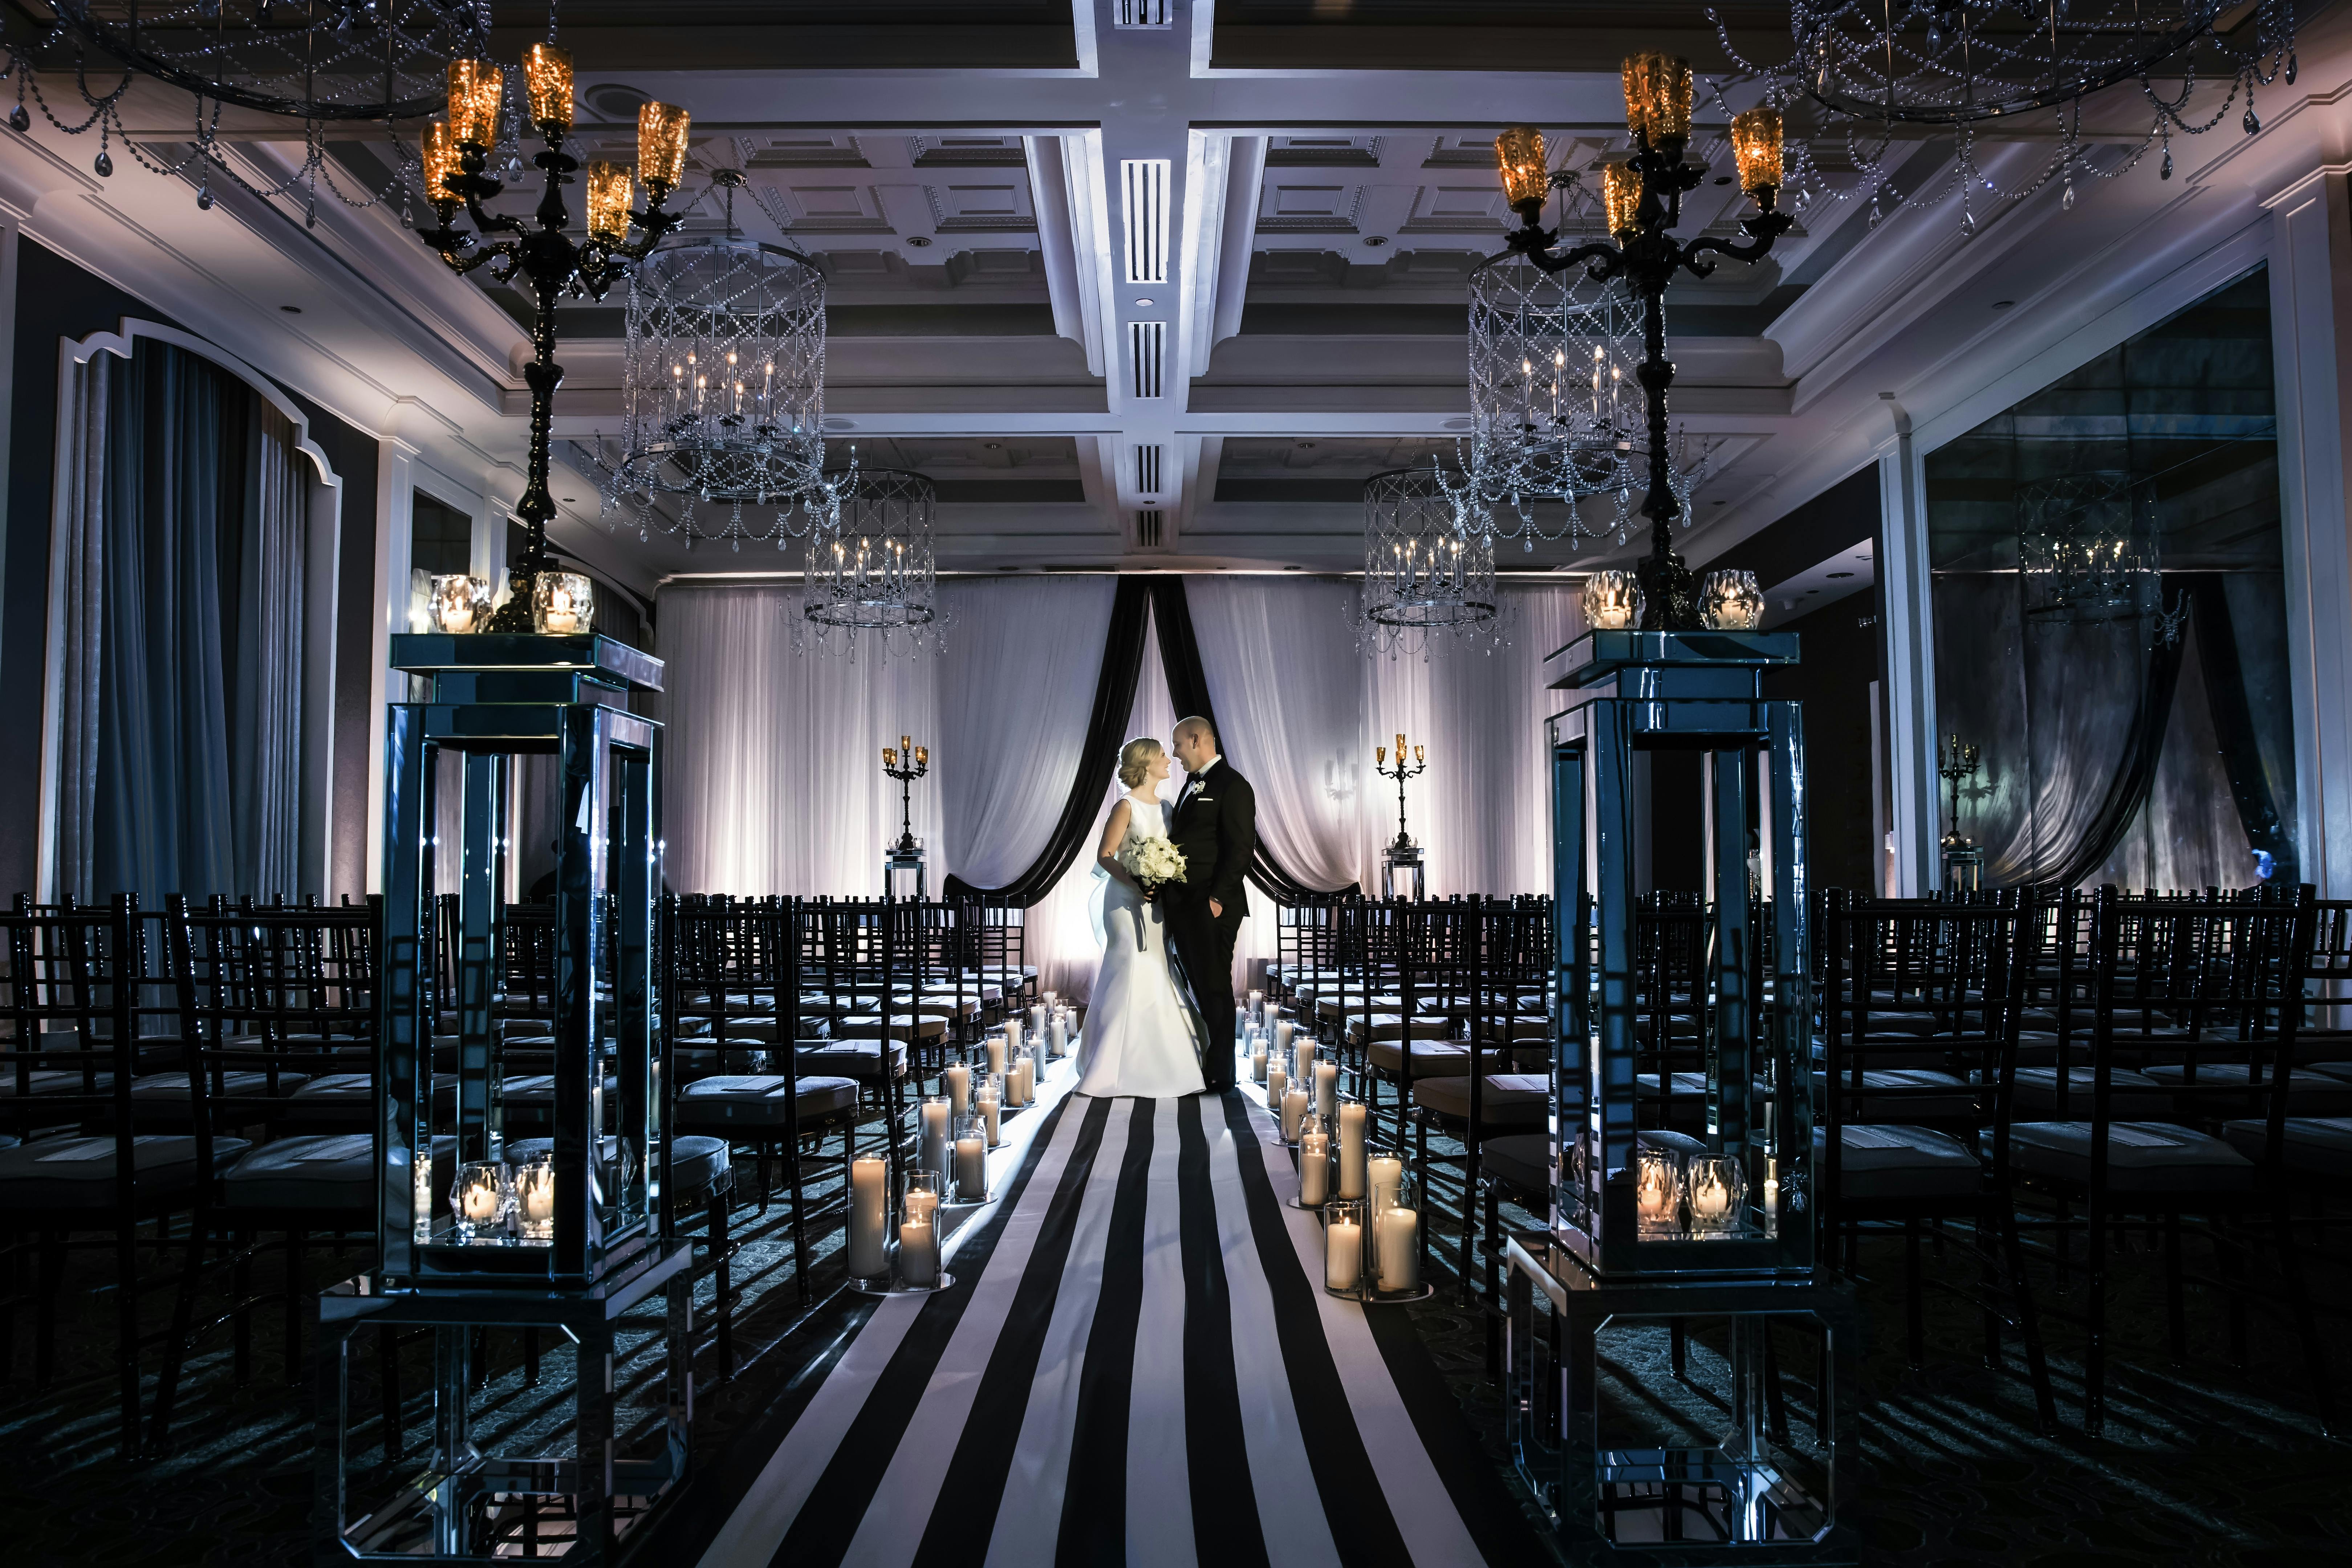 Unique Wedding Ceremony With Black and White Striped Aisle Runner | PartySlate